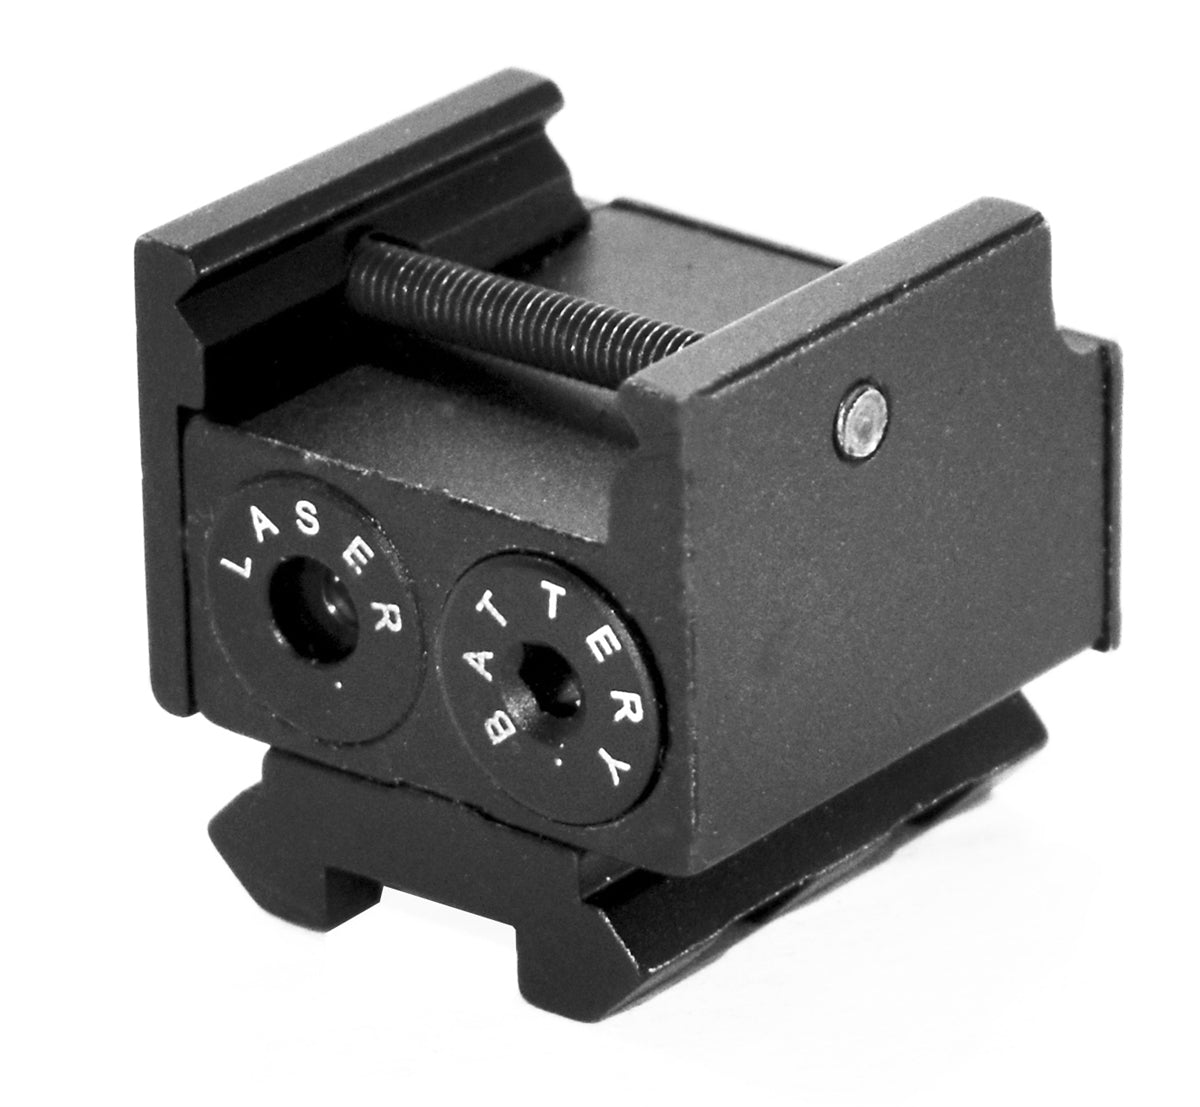 Trinity Compact red dot Sight for fn 509 Tactical Optics Home Defense Accessory Picatinny Weaver Mount Adapter Aluminum Black.